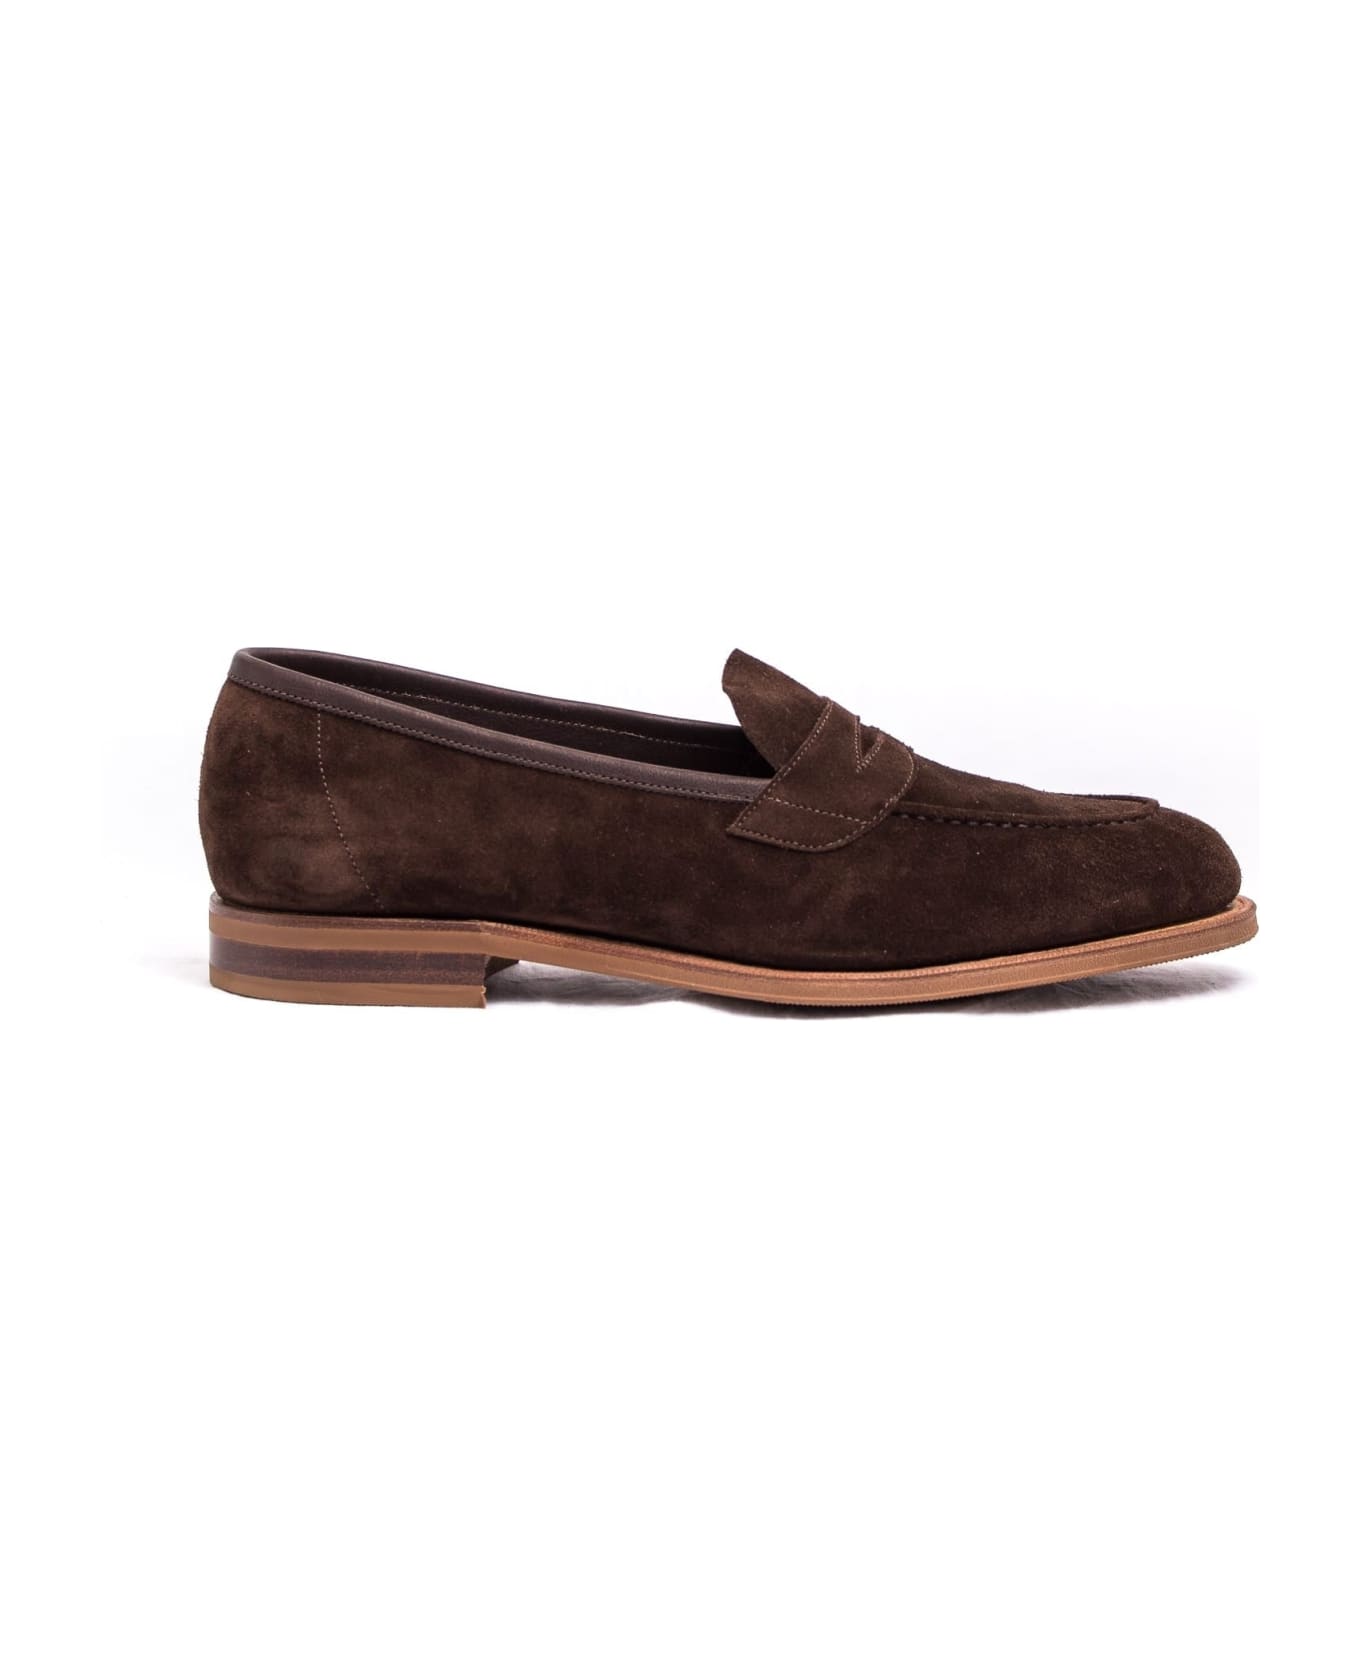 Edward Green Ventnor Mocca Suede E184 Loafer Light Brown Sole - Mocca ローファー＆デッキシューズ